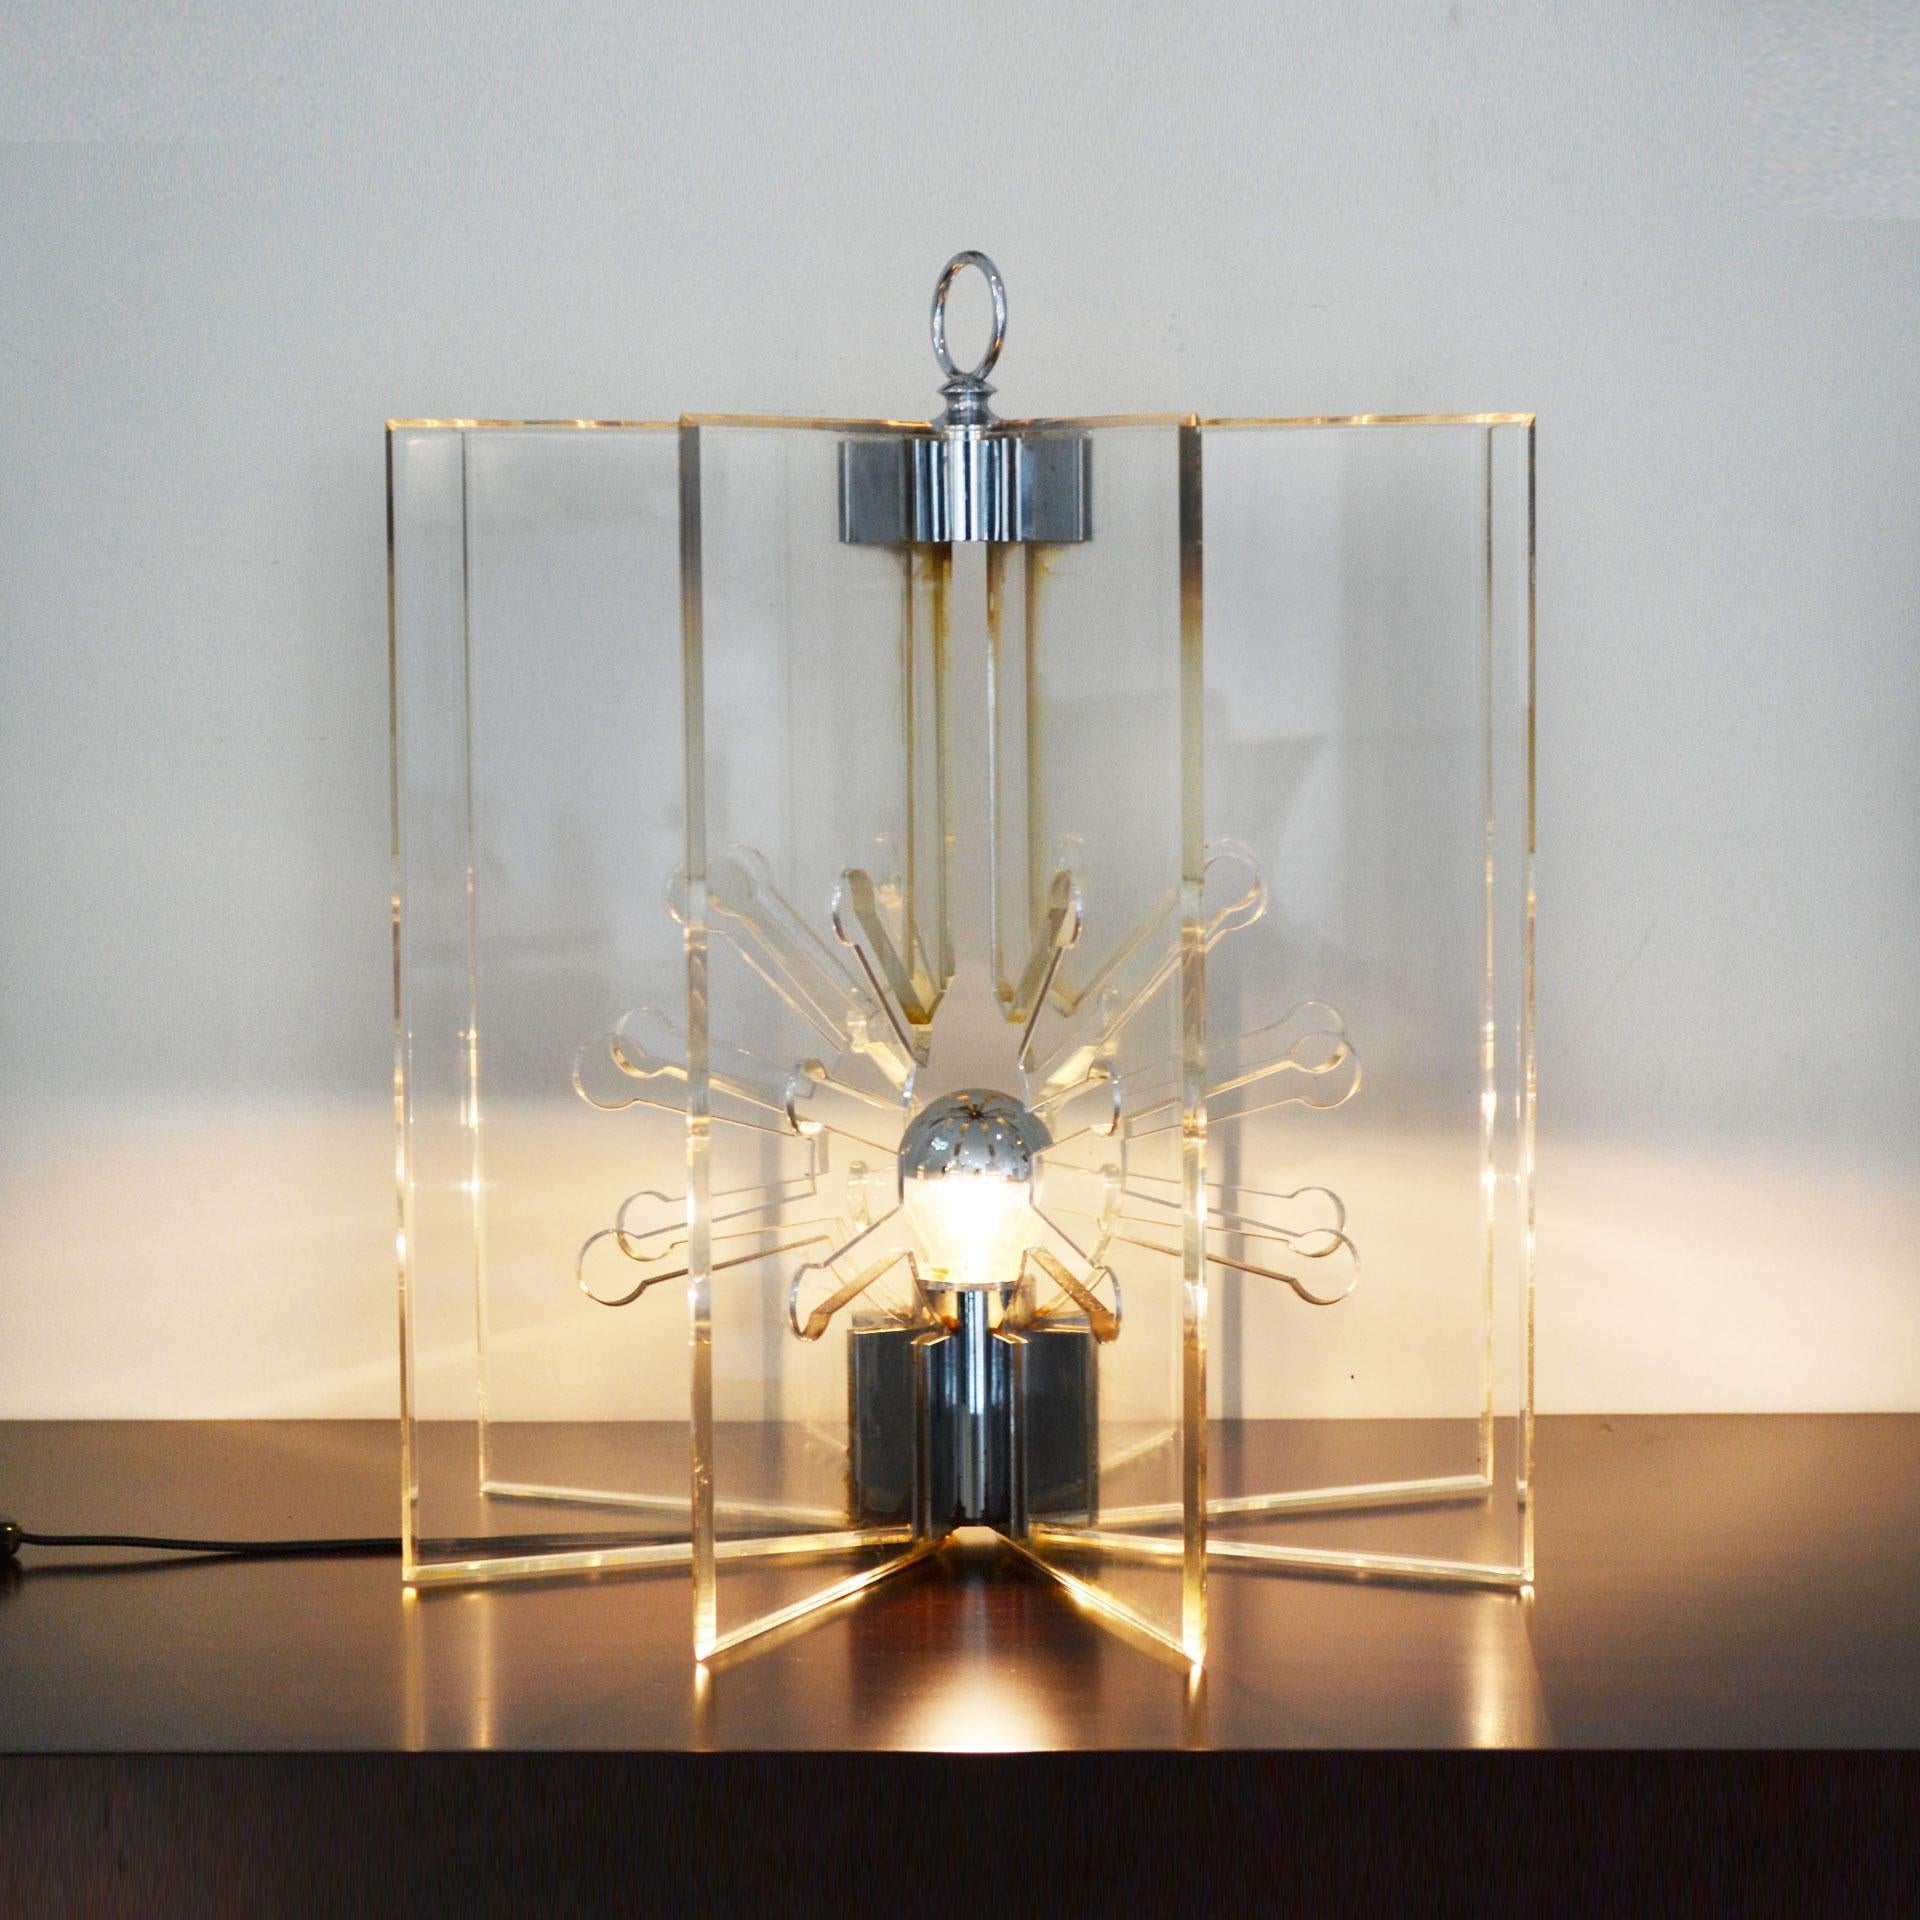 Table lamp model 524 designed by the couple of great designers such as Franco Albini and Franca Helg, produced starting from 1963 for Arteluce. The lamp has a core structure in chromed brass with eight transparent panels in perspex. 
Good